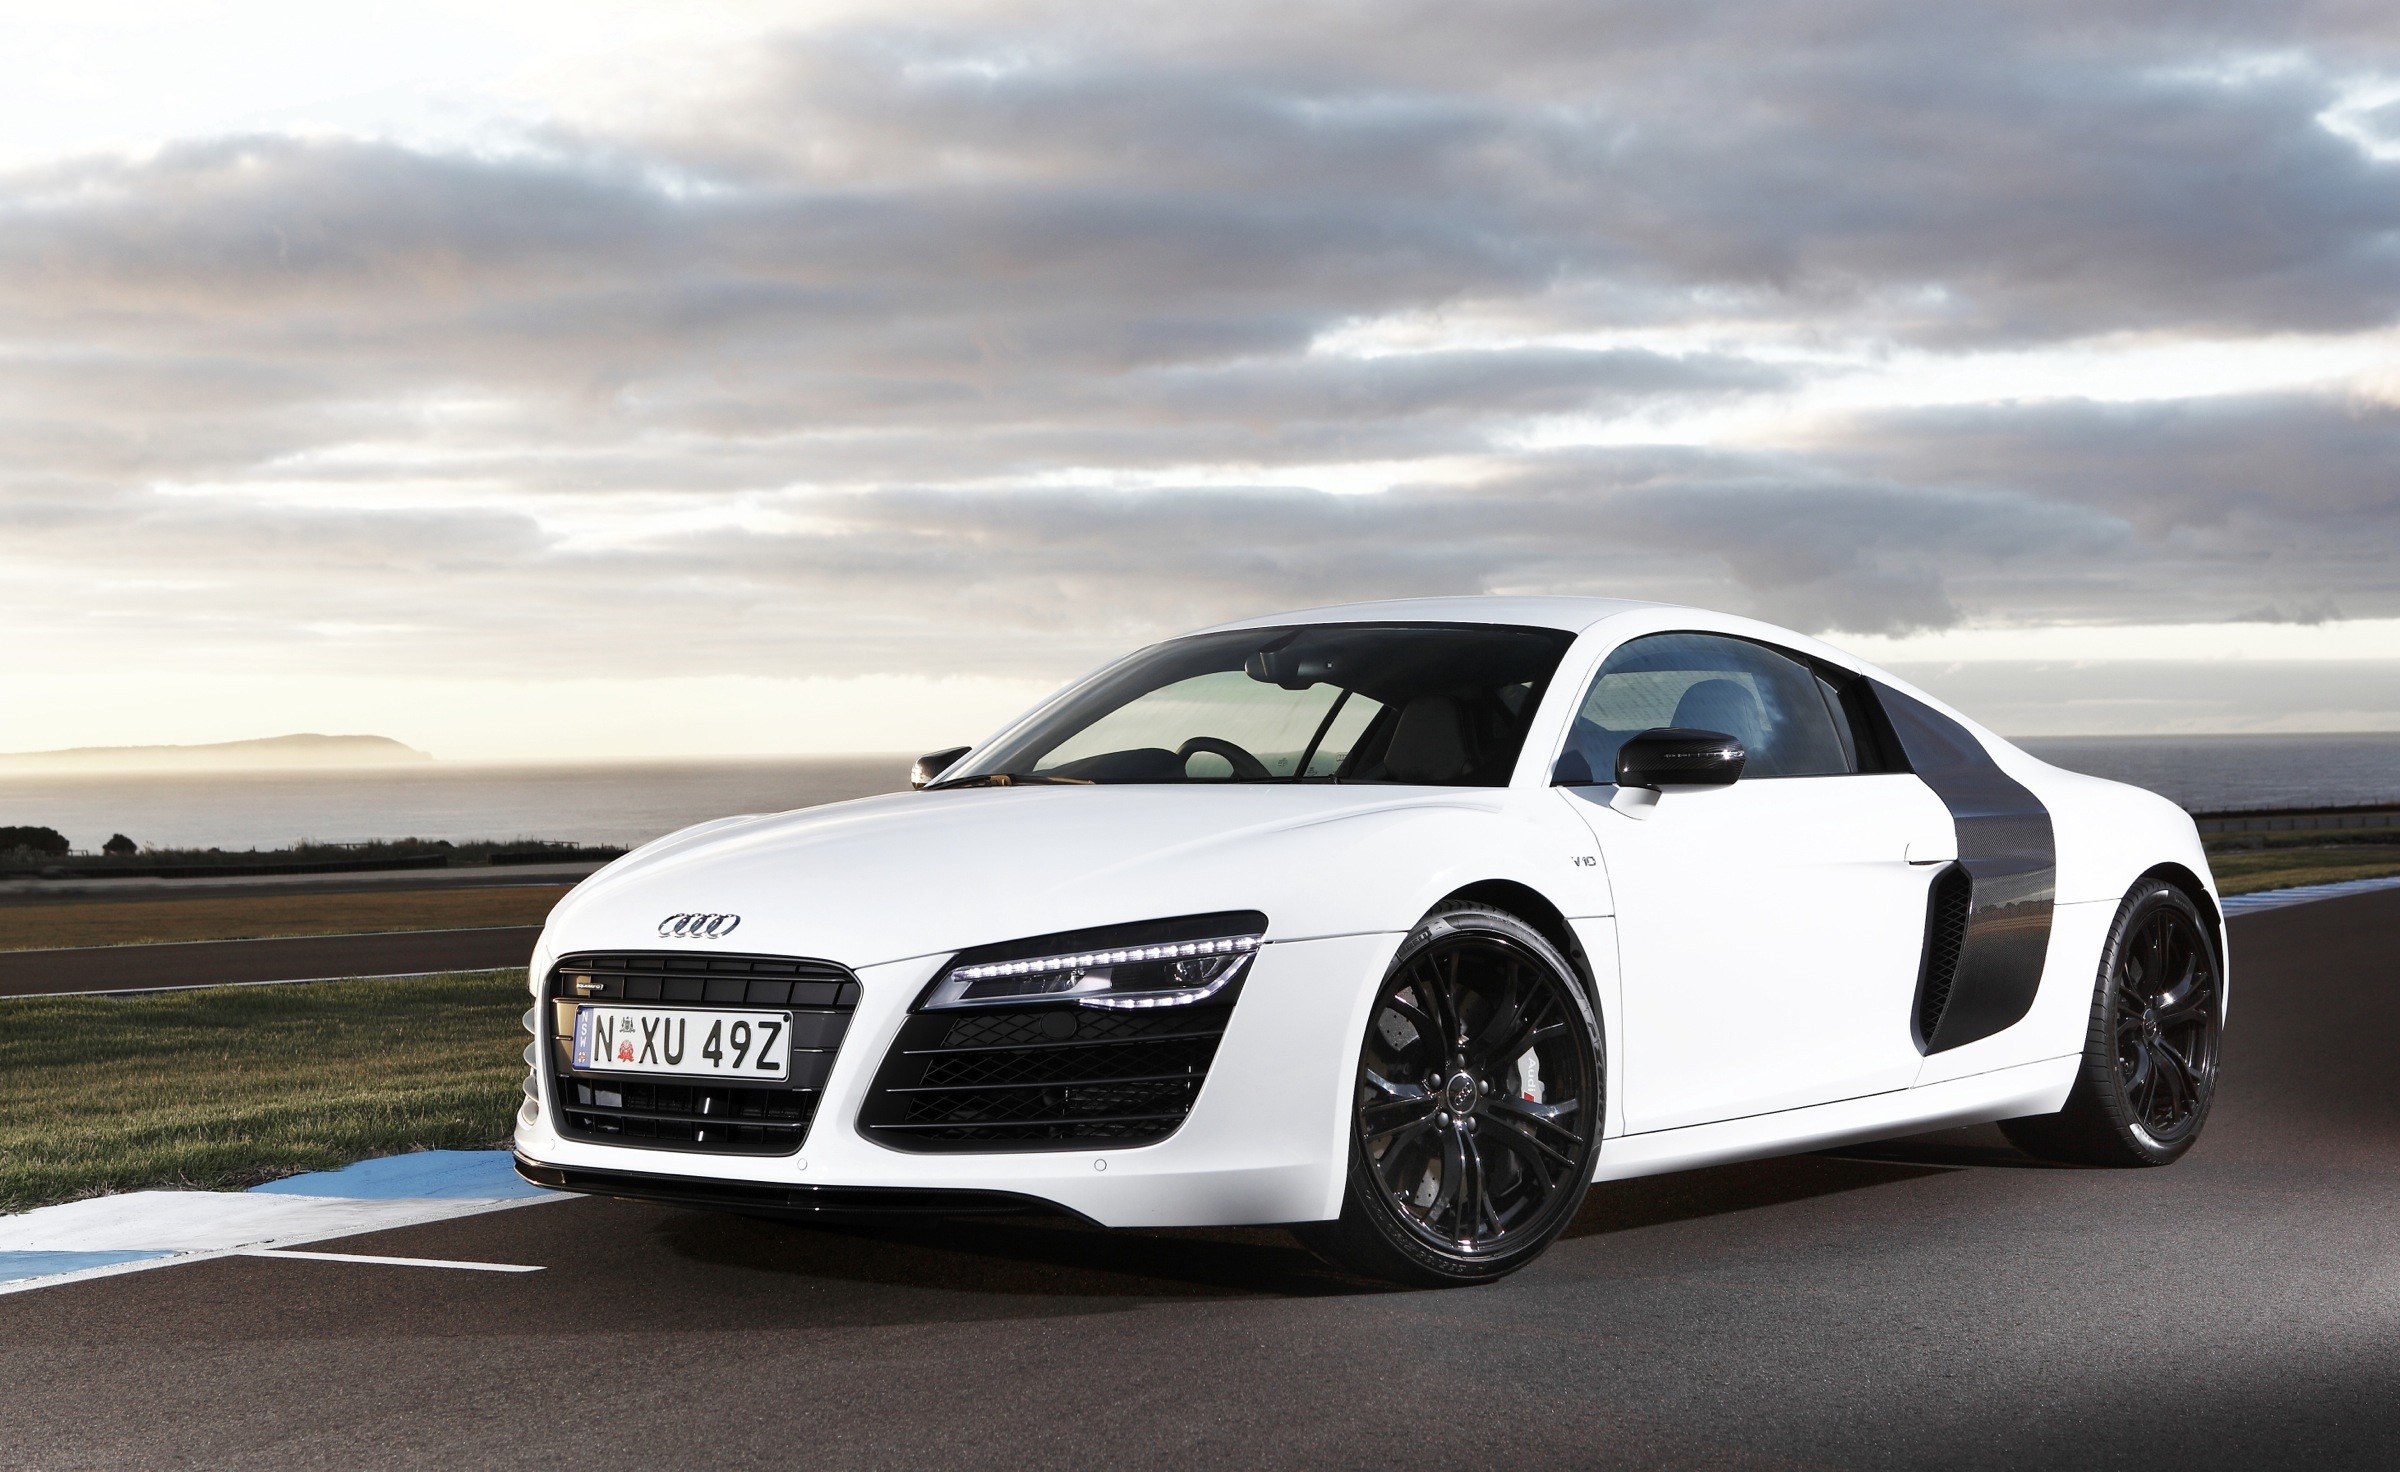 2400x1472 white audi r8 wallpapers hd - http://69hdwallpapers.com/white-